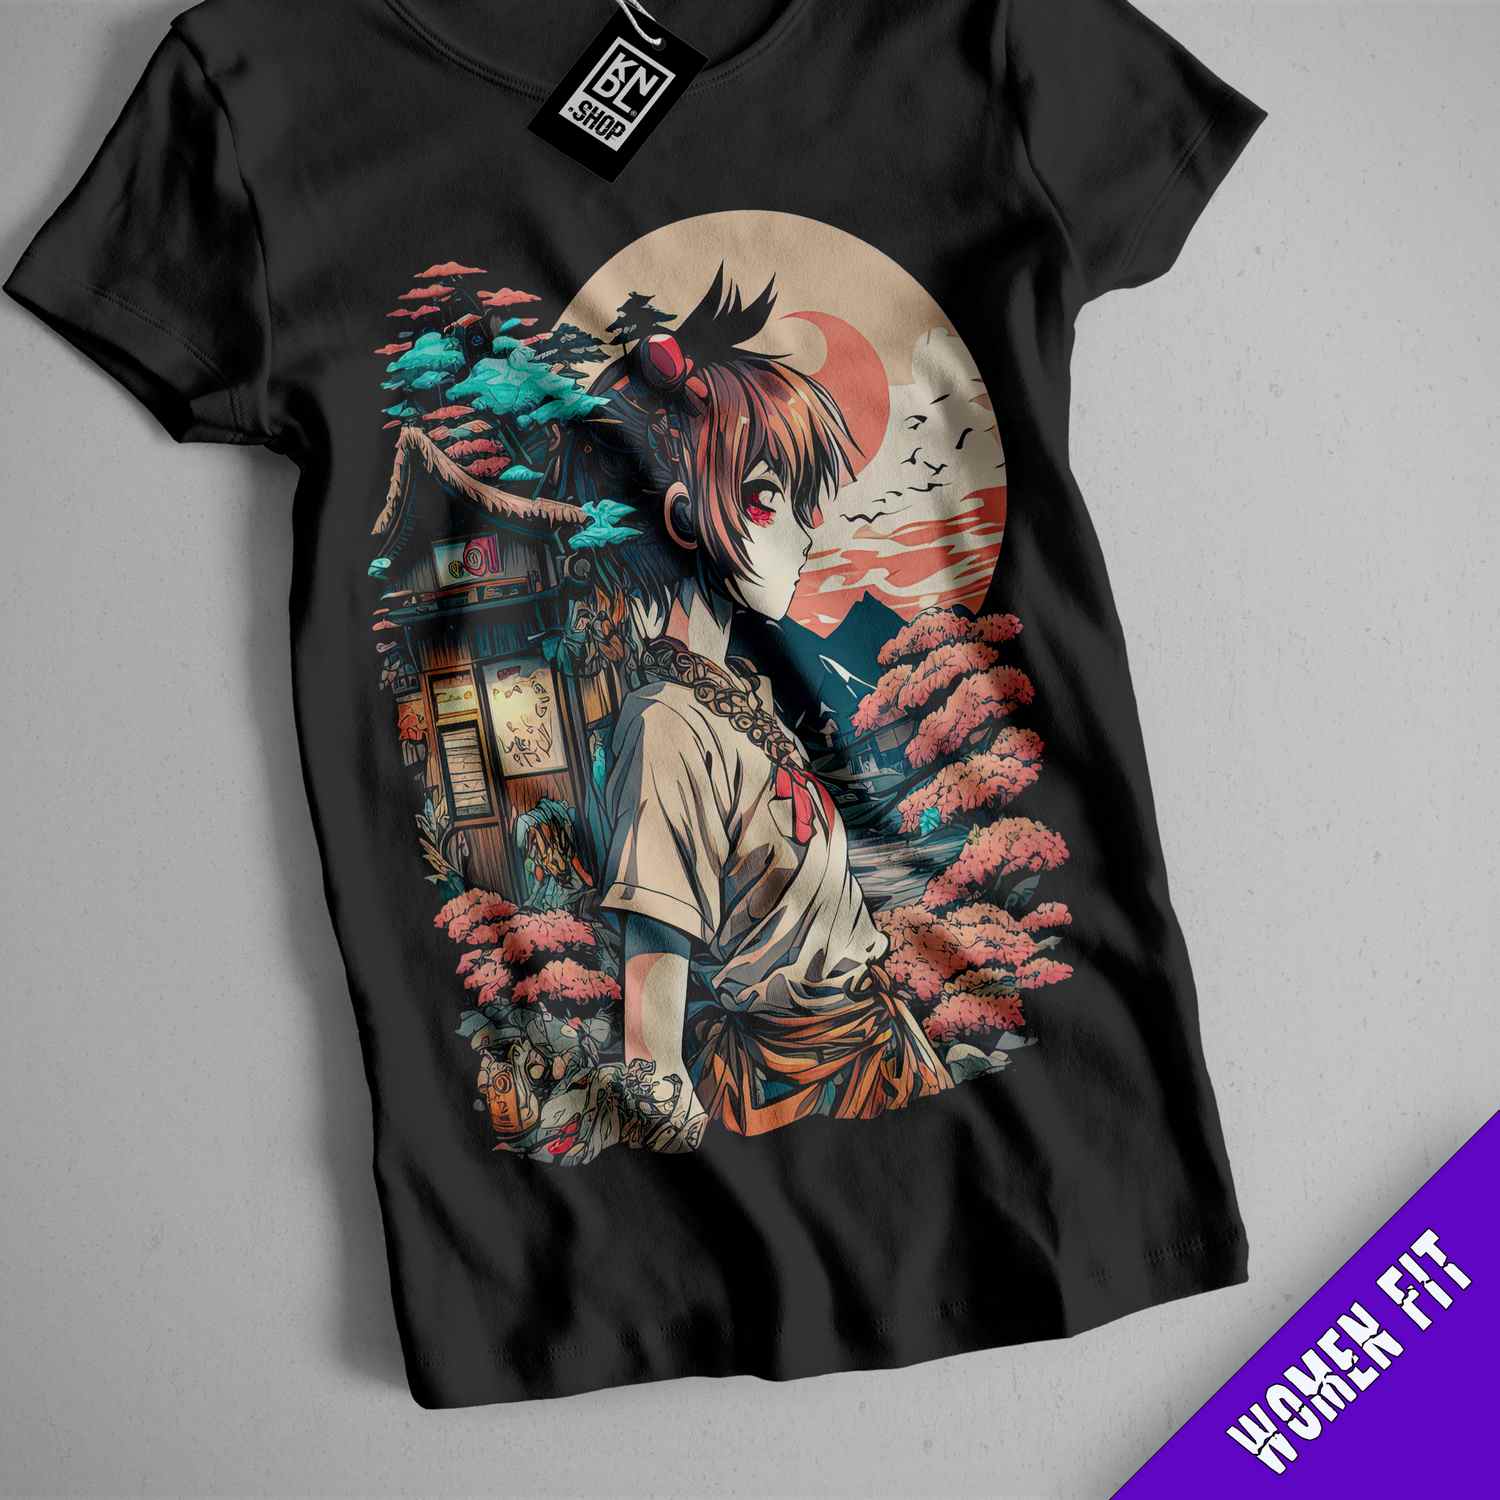 a t - shirt with a picture of an anime character on it